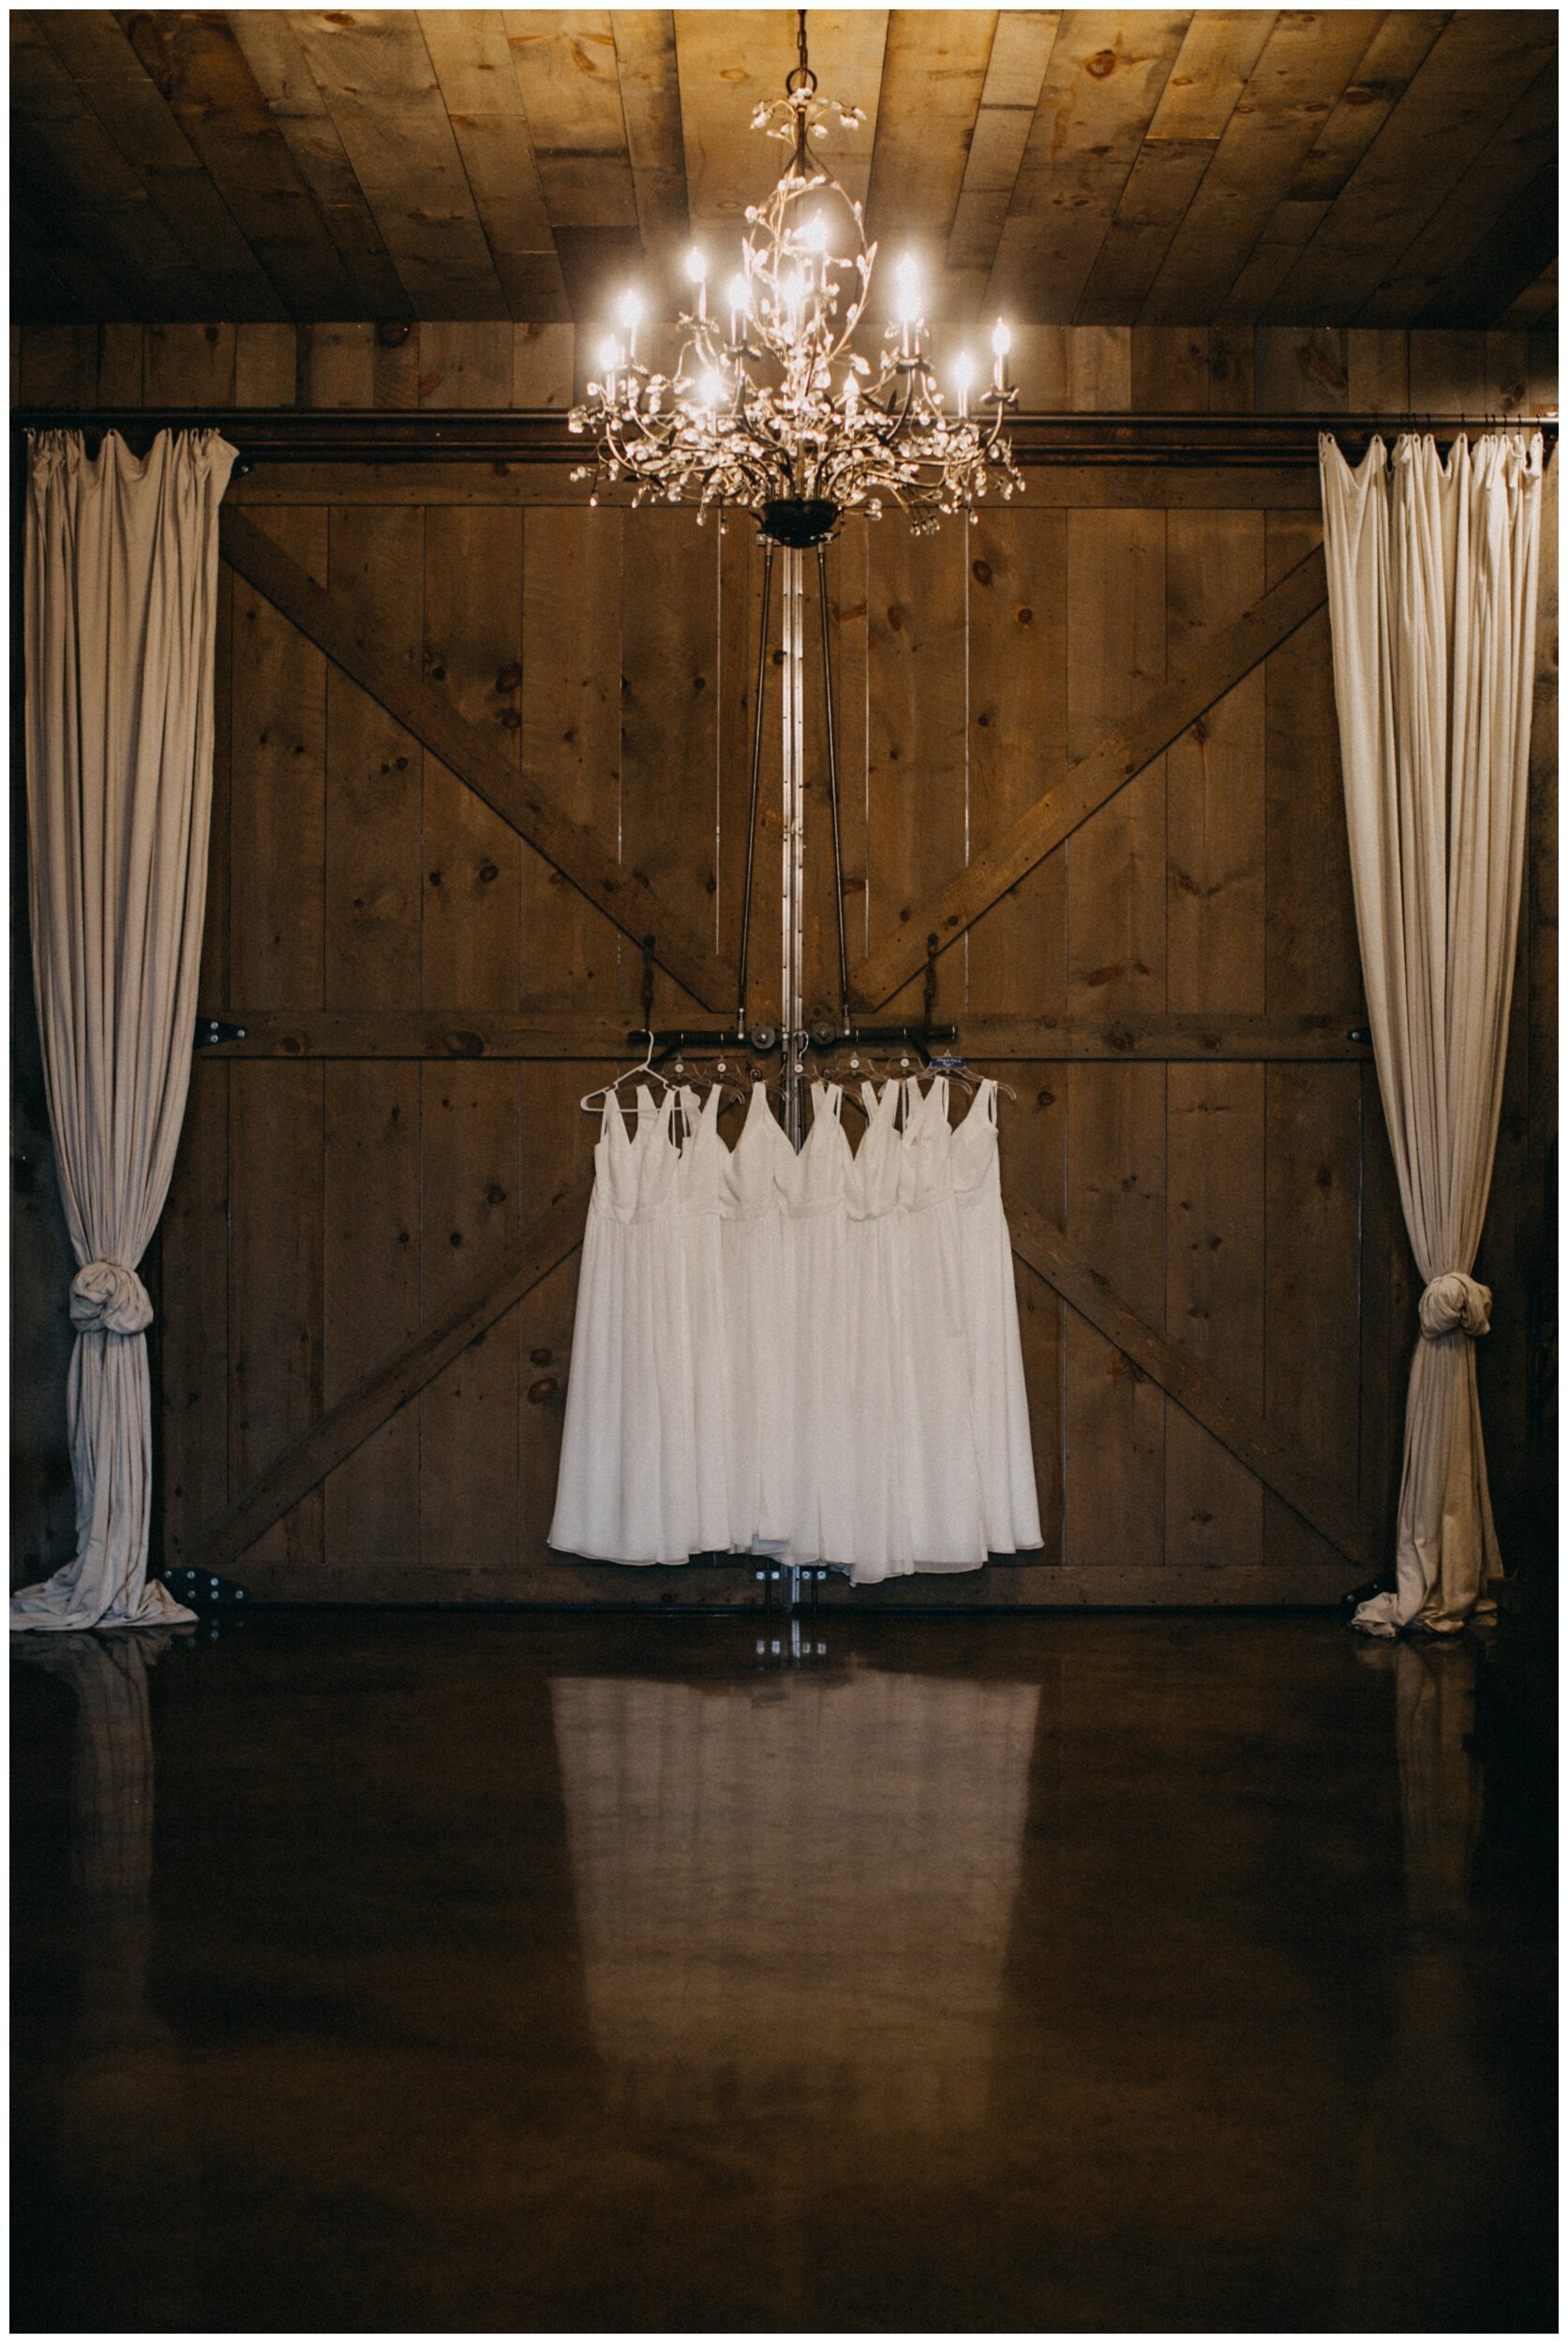 All white bridesmaid dresses hanging in barn wedding venue at Creekside Farm